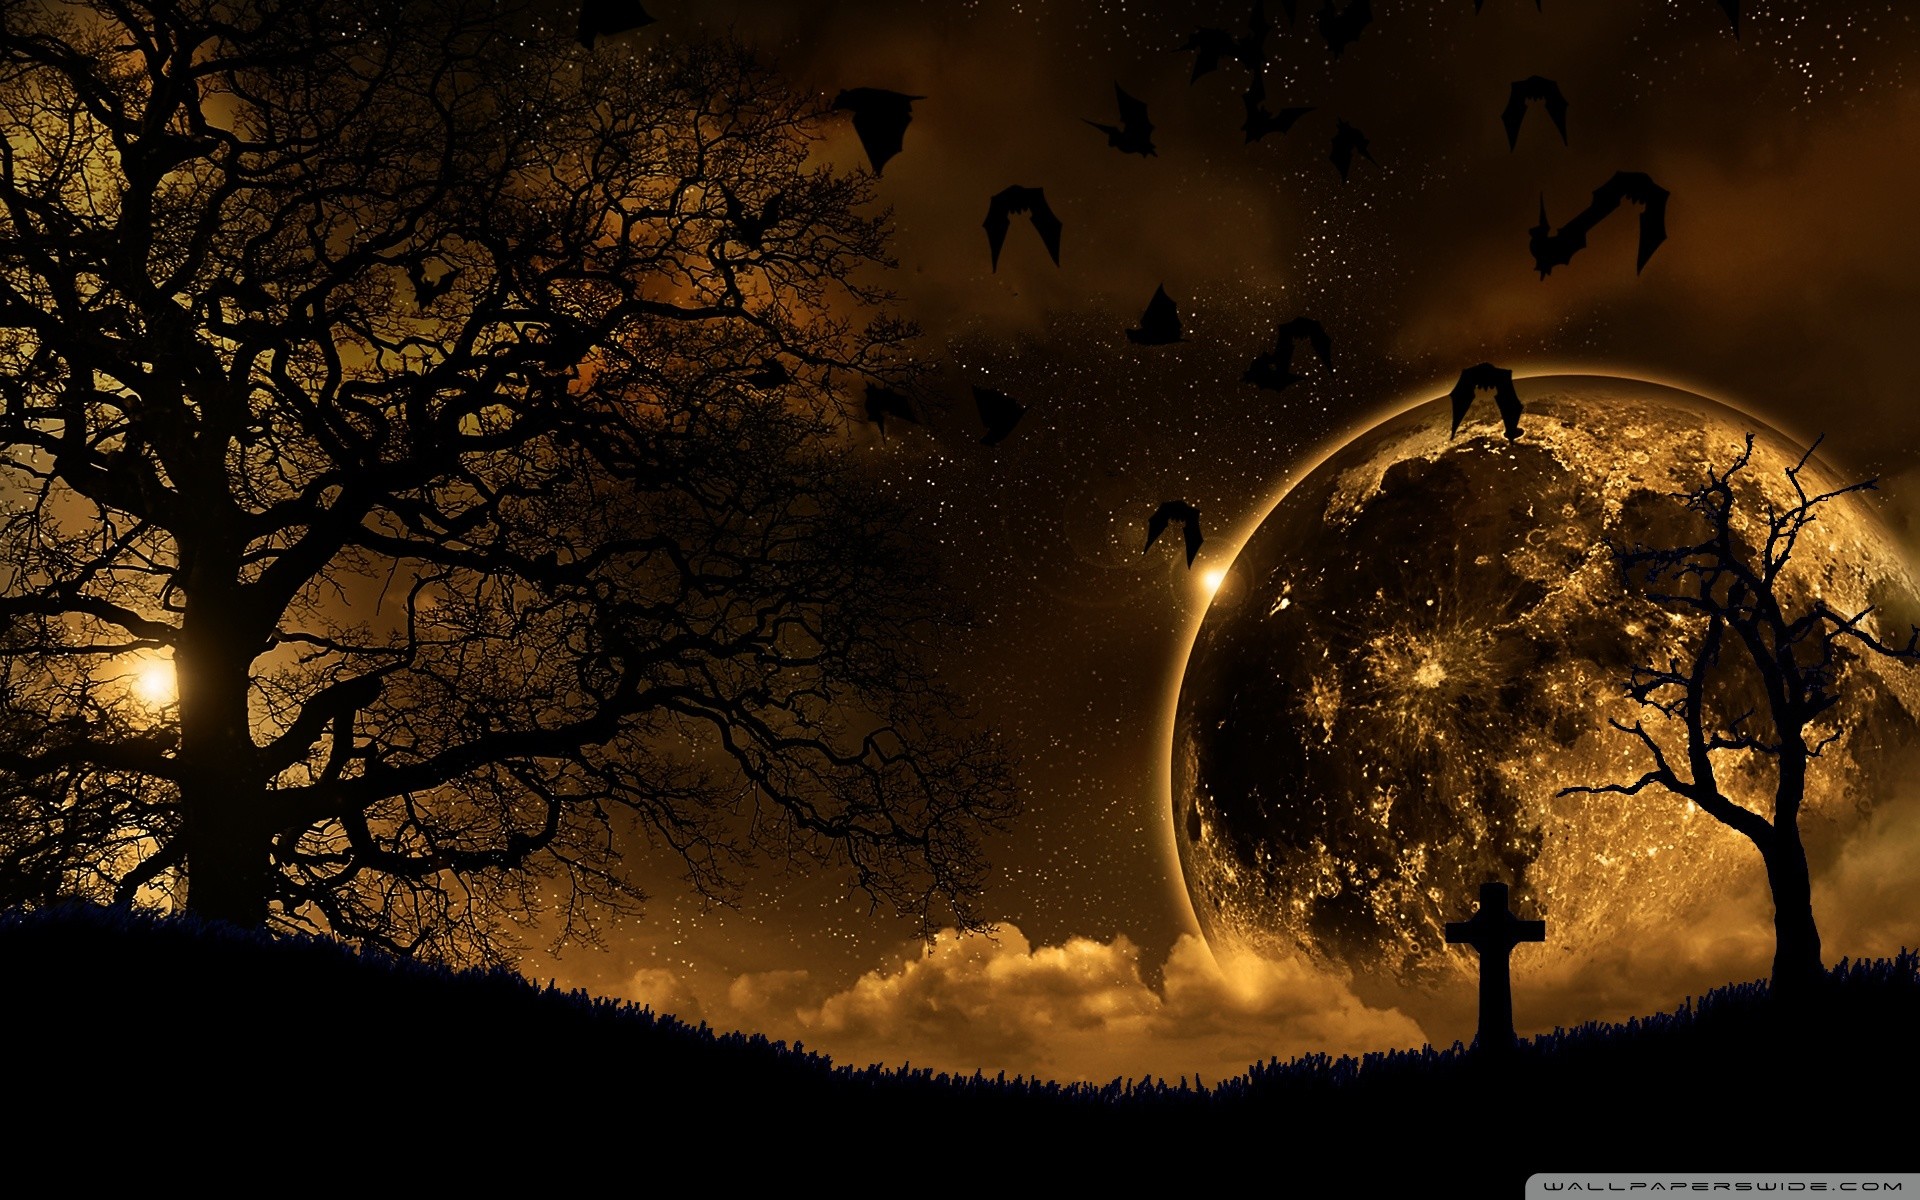 1920x1200, Spooky Cemetery Wallpaper - All Hallows Eve Background , HD Wallpaper & Backgrounds